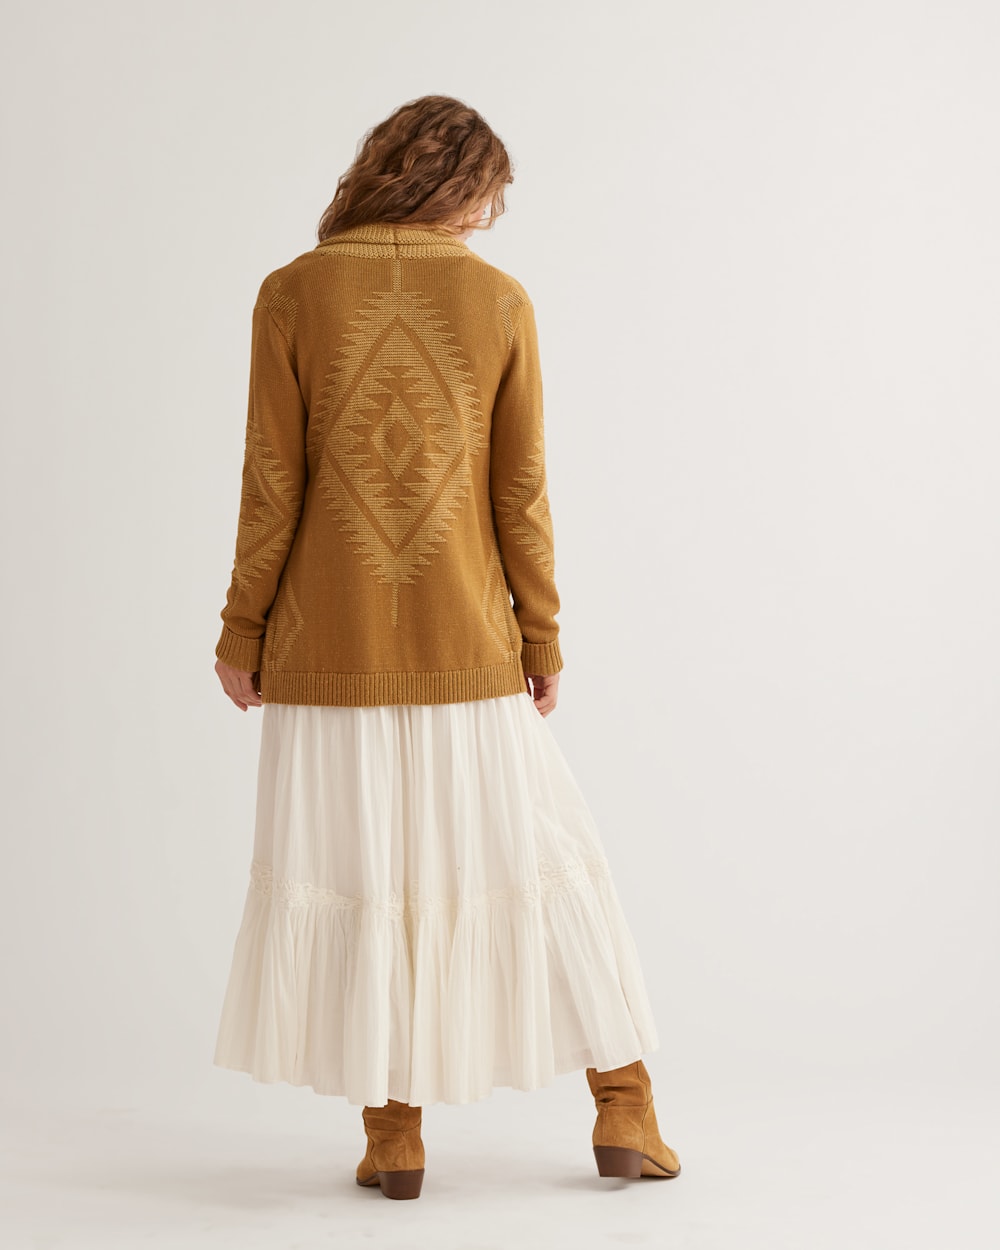 ALTERNATE VIEW OF WOMEN'S HERITAGE COTTON CARDIGAN IN BRONZE/CURRY image number 3